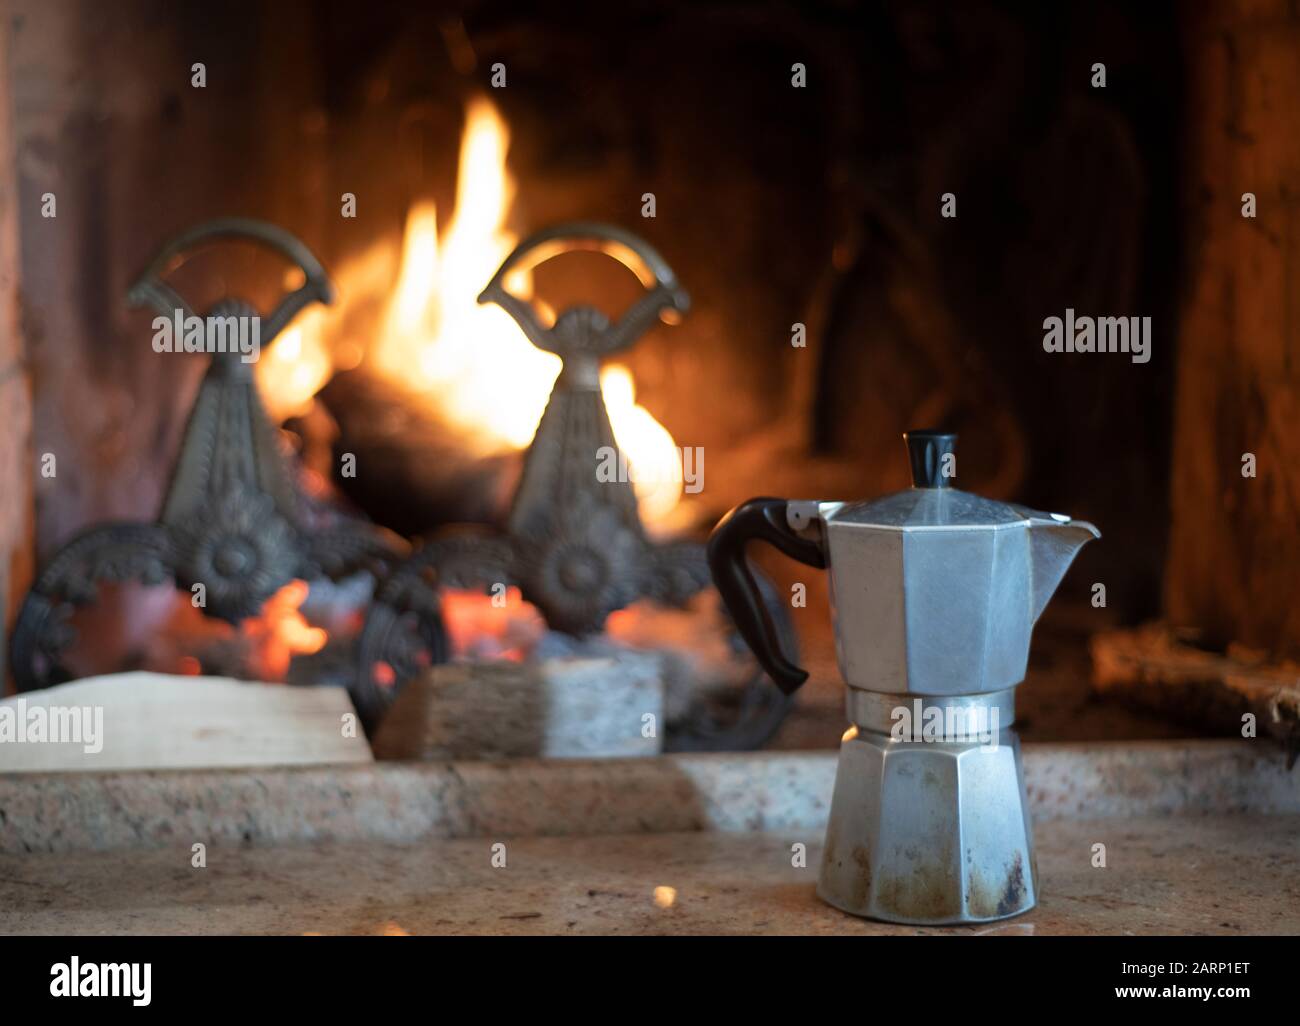 Italian coffee pot in front of a burning fire with andirons in a brick indoor chimney in a concept of relaxation Stock Photo